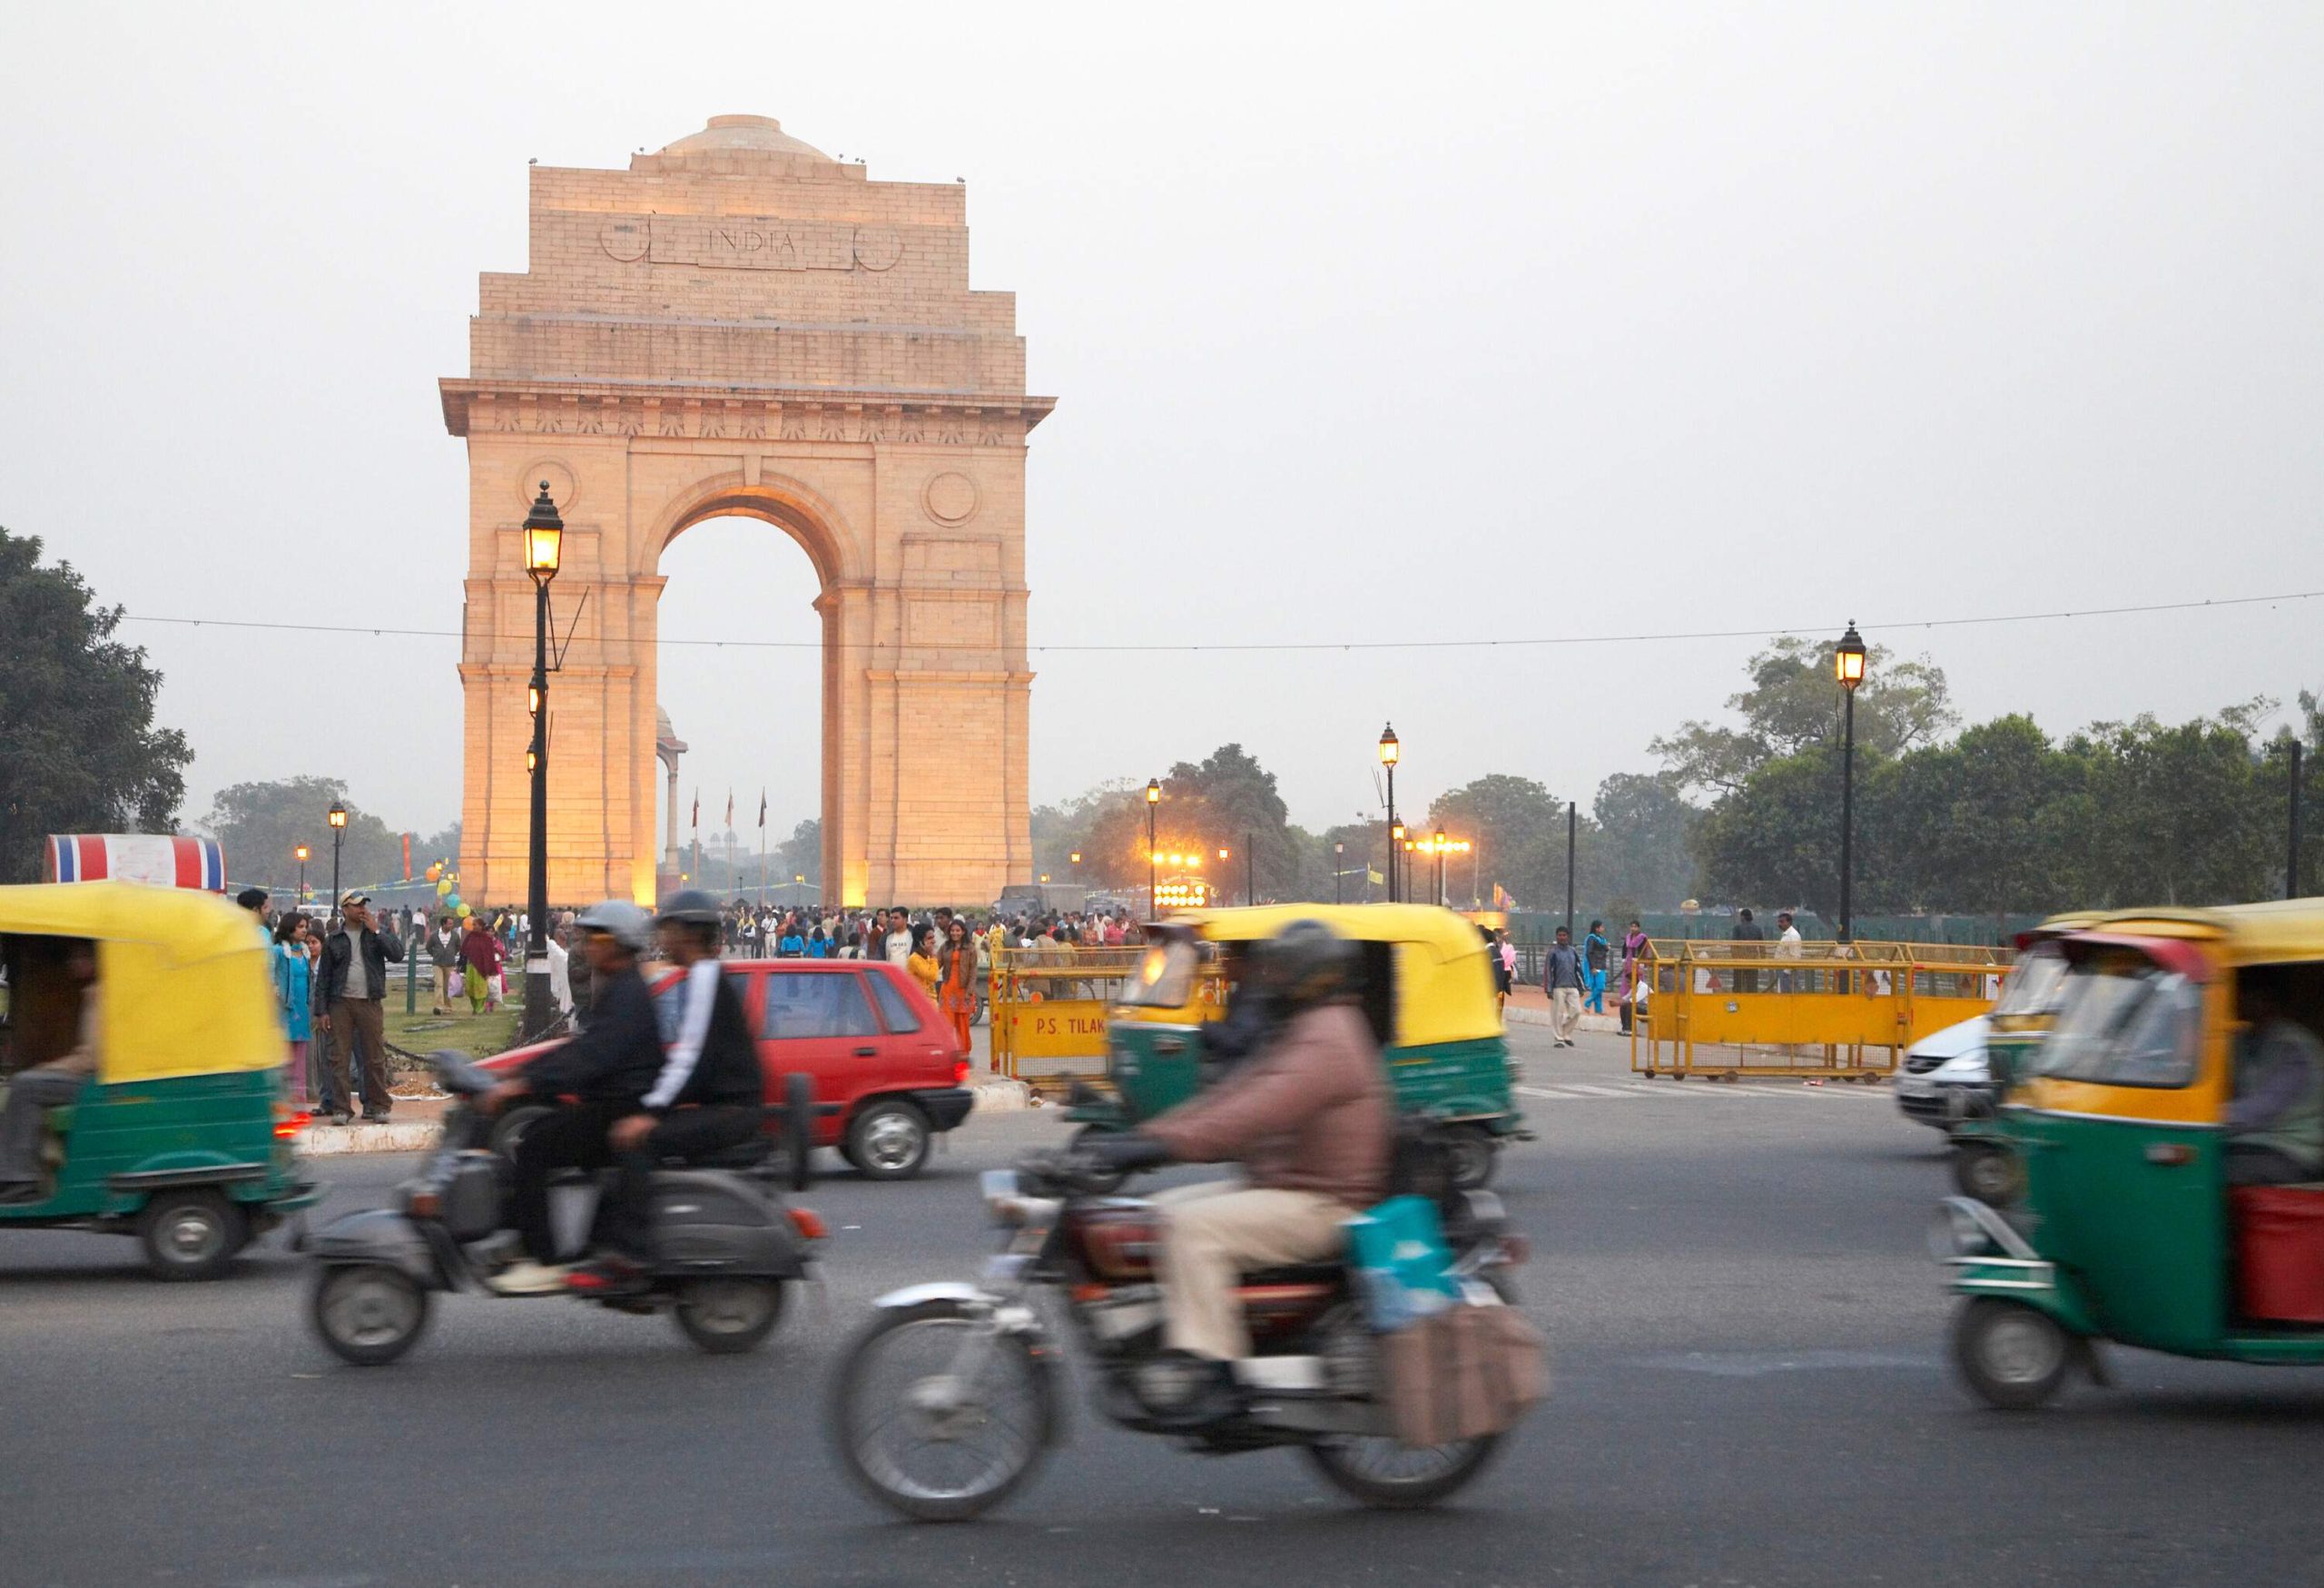 Motorcycles and rickshaws travelling down the street, with the India Gate in the backdrop.